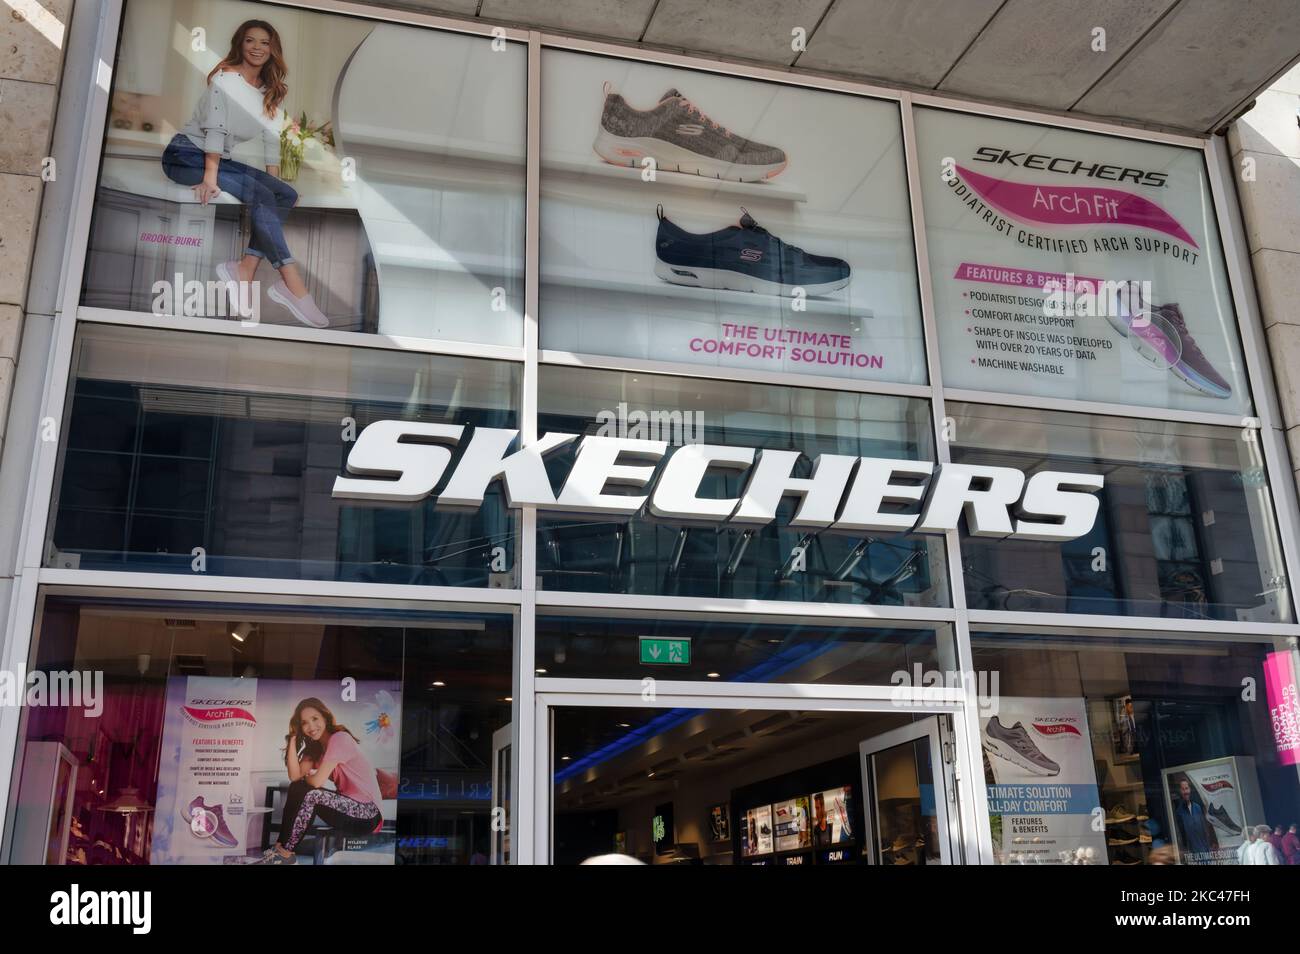 Glasgow, UK- Sept 10, 2022: The sign for Skechers shoe store in downtown Glasgow, Scotland Stock Photo